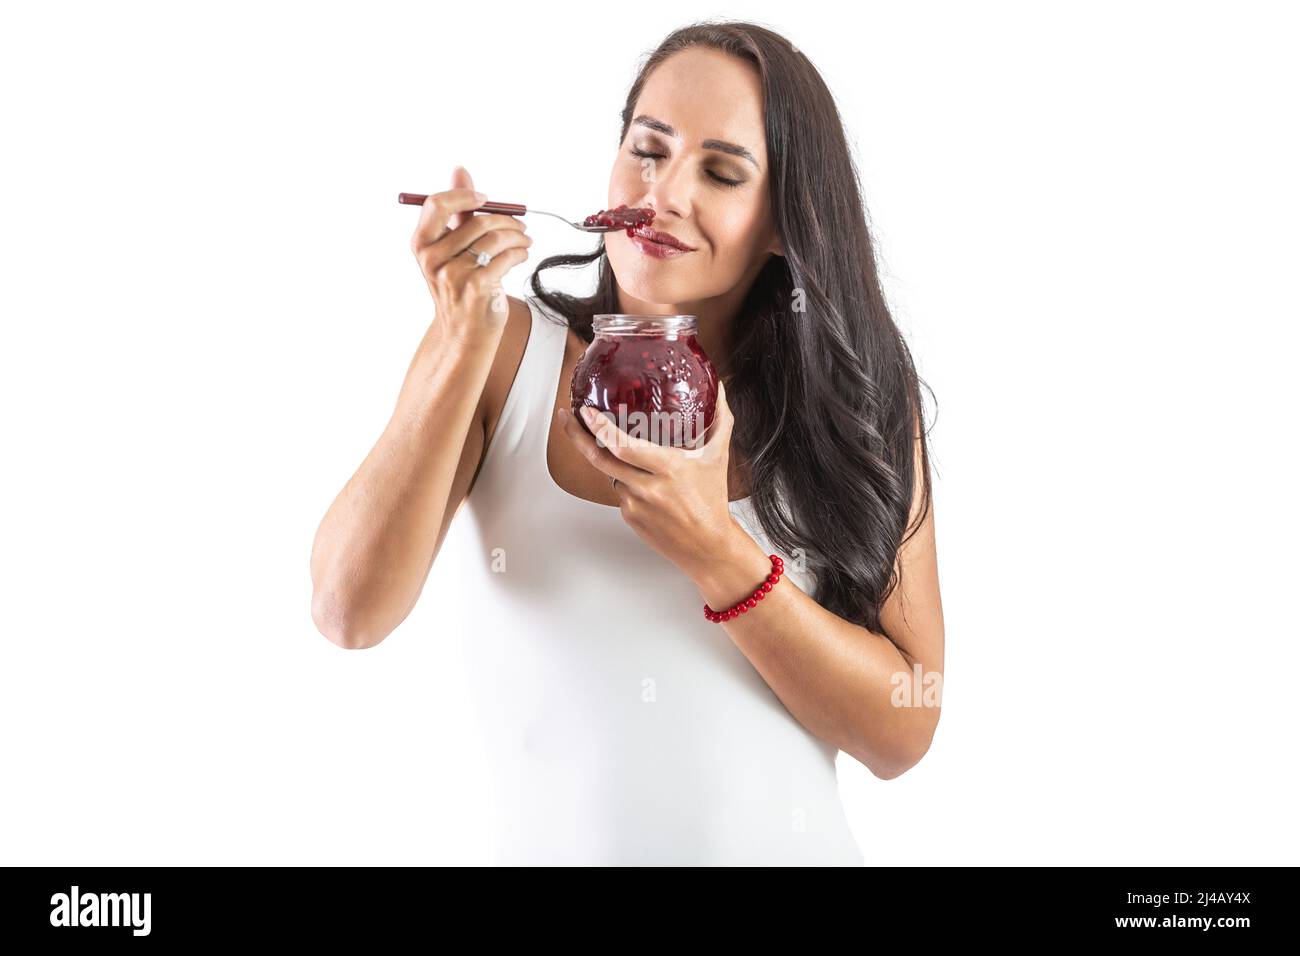 Charming brunette is holding a spoon sull of jam and smelling the tasty and sweet aroma. Isolated background. Stock Photo